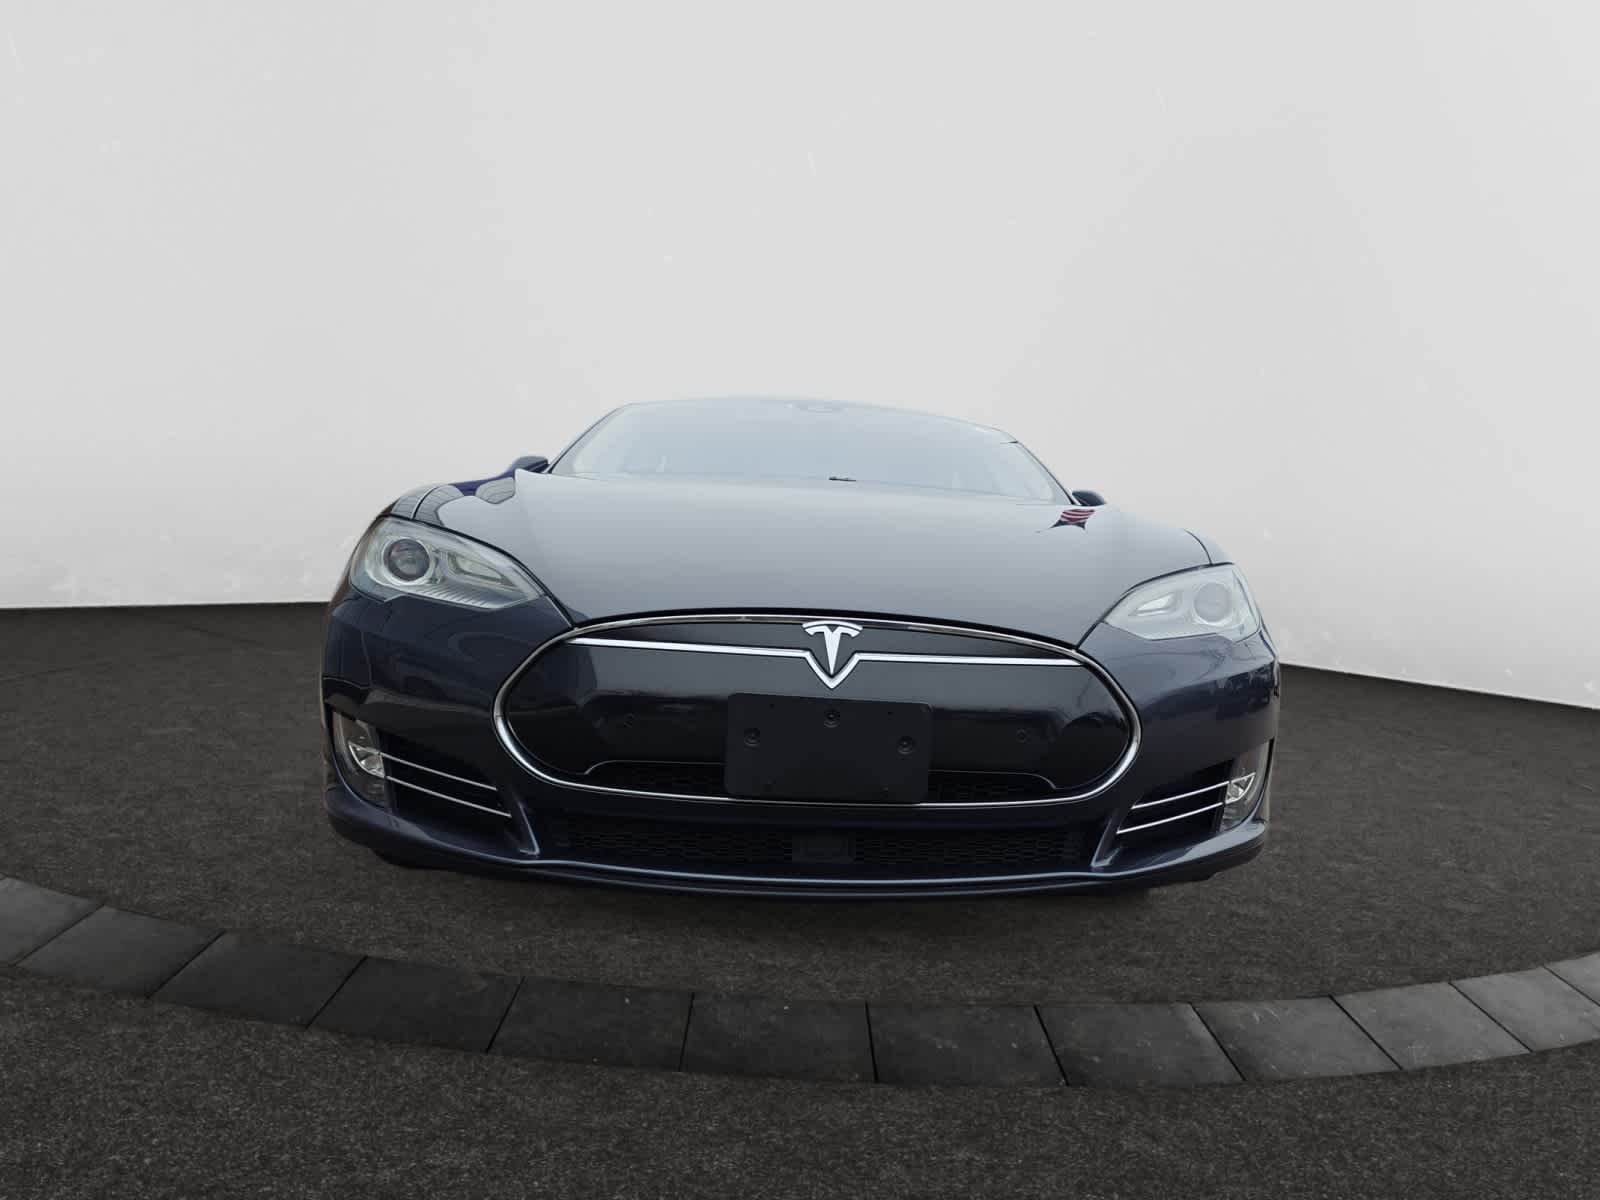 Used 2015 Tesla Model S 85D with VIN 5YJSA1H22FF081773 for sale in Norwood, MA